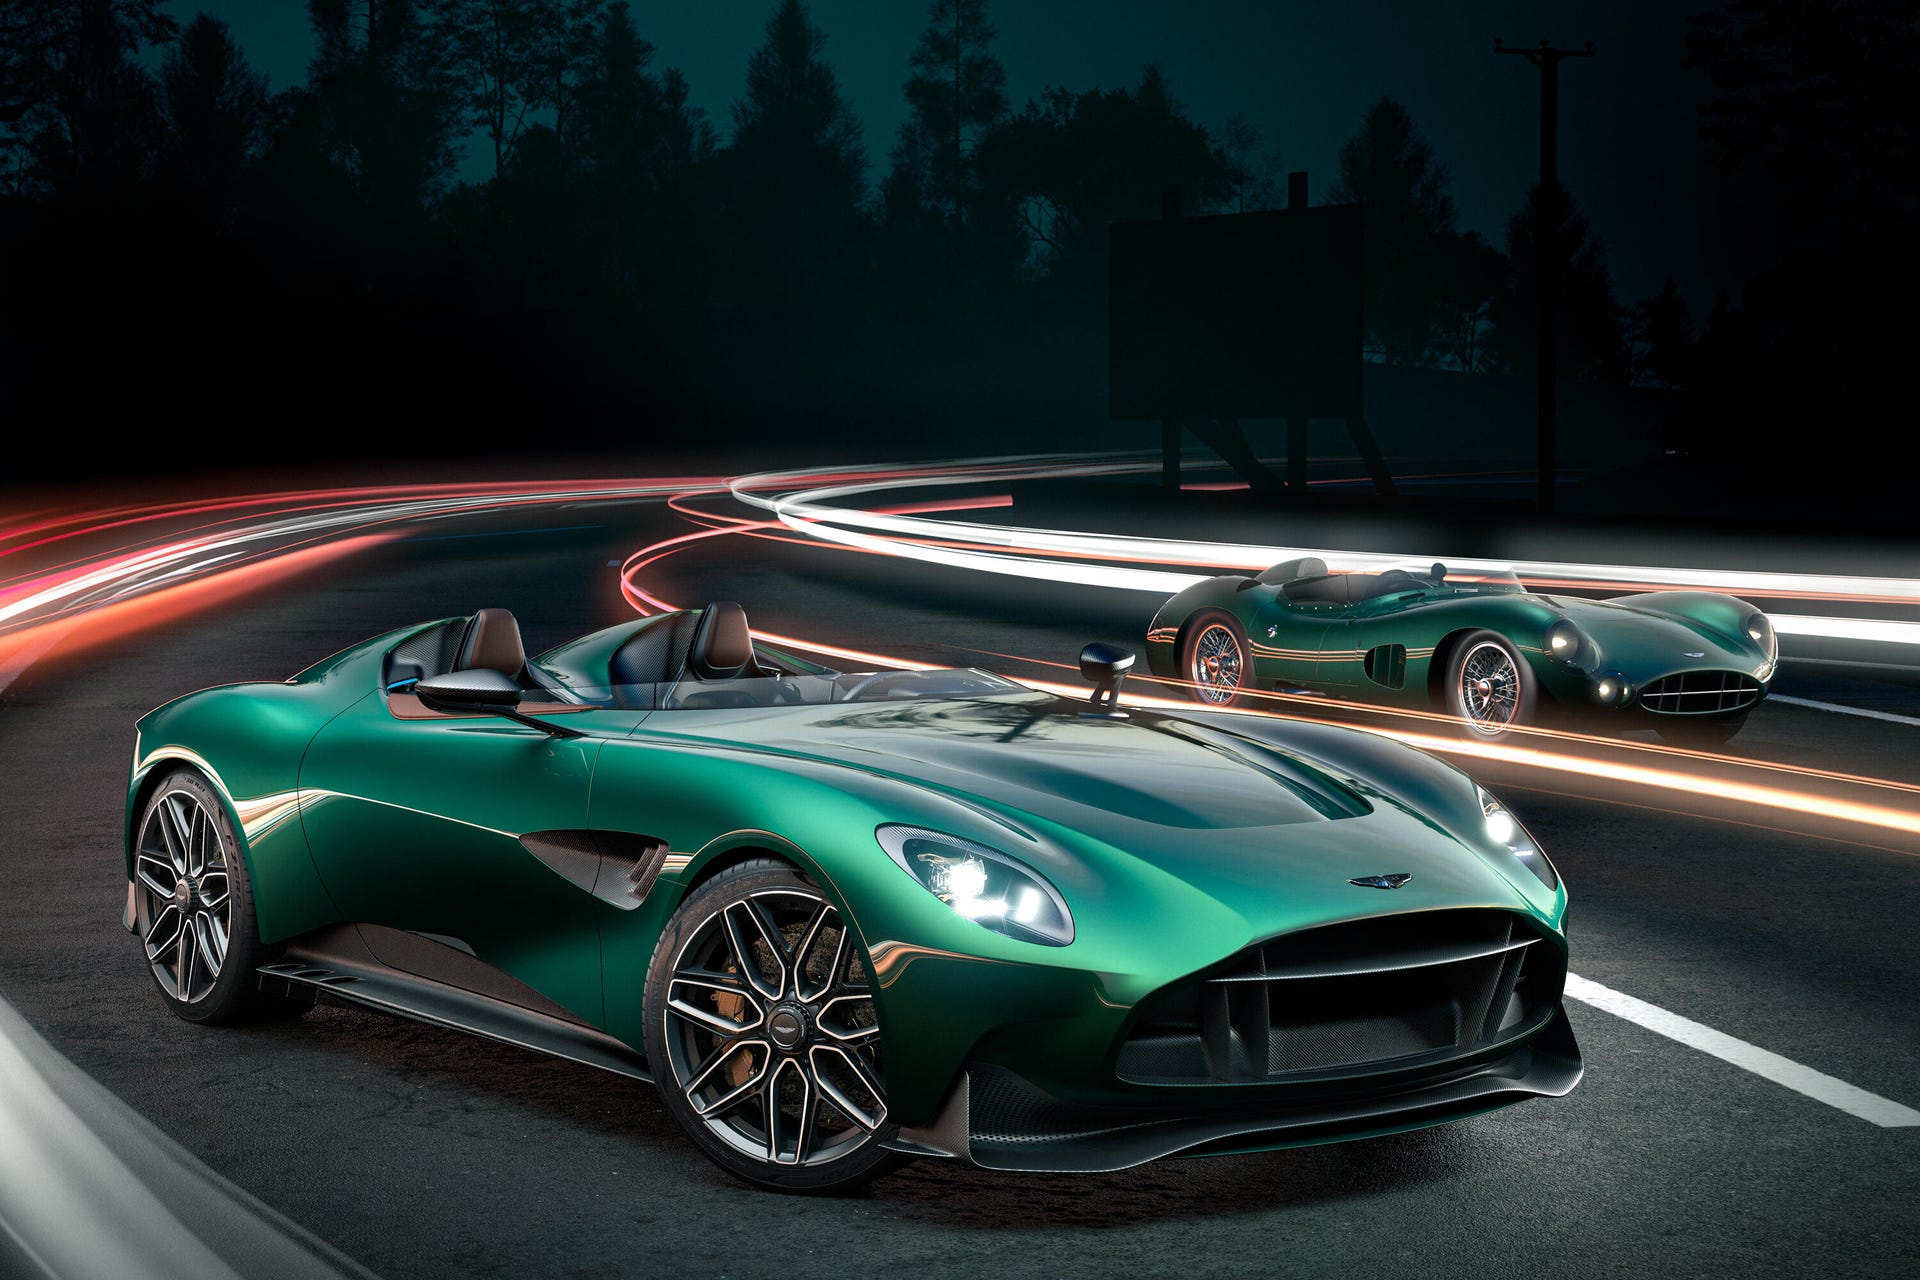 Front 3/4 of a green Aston Martin DBR22 speedster in front of a vintage DBR1 race car